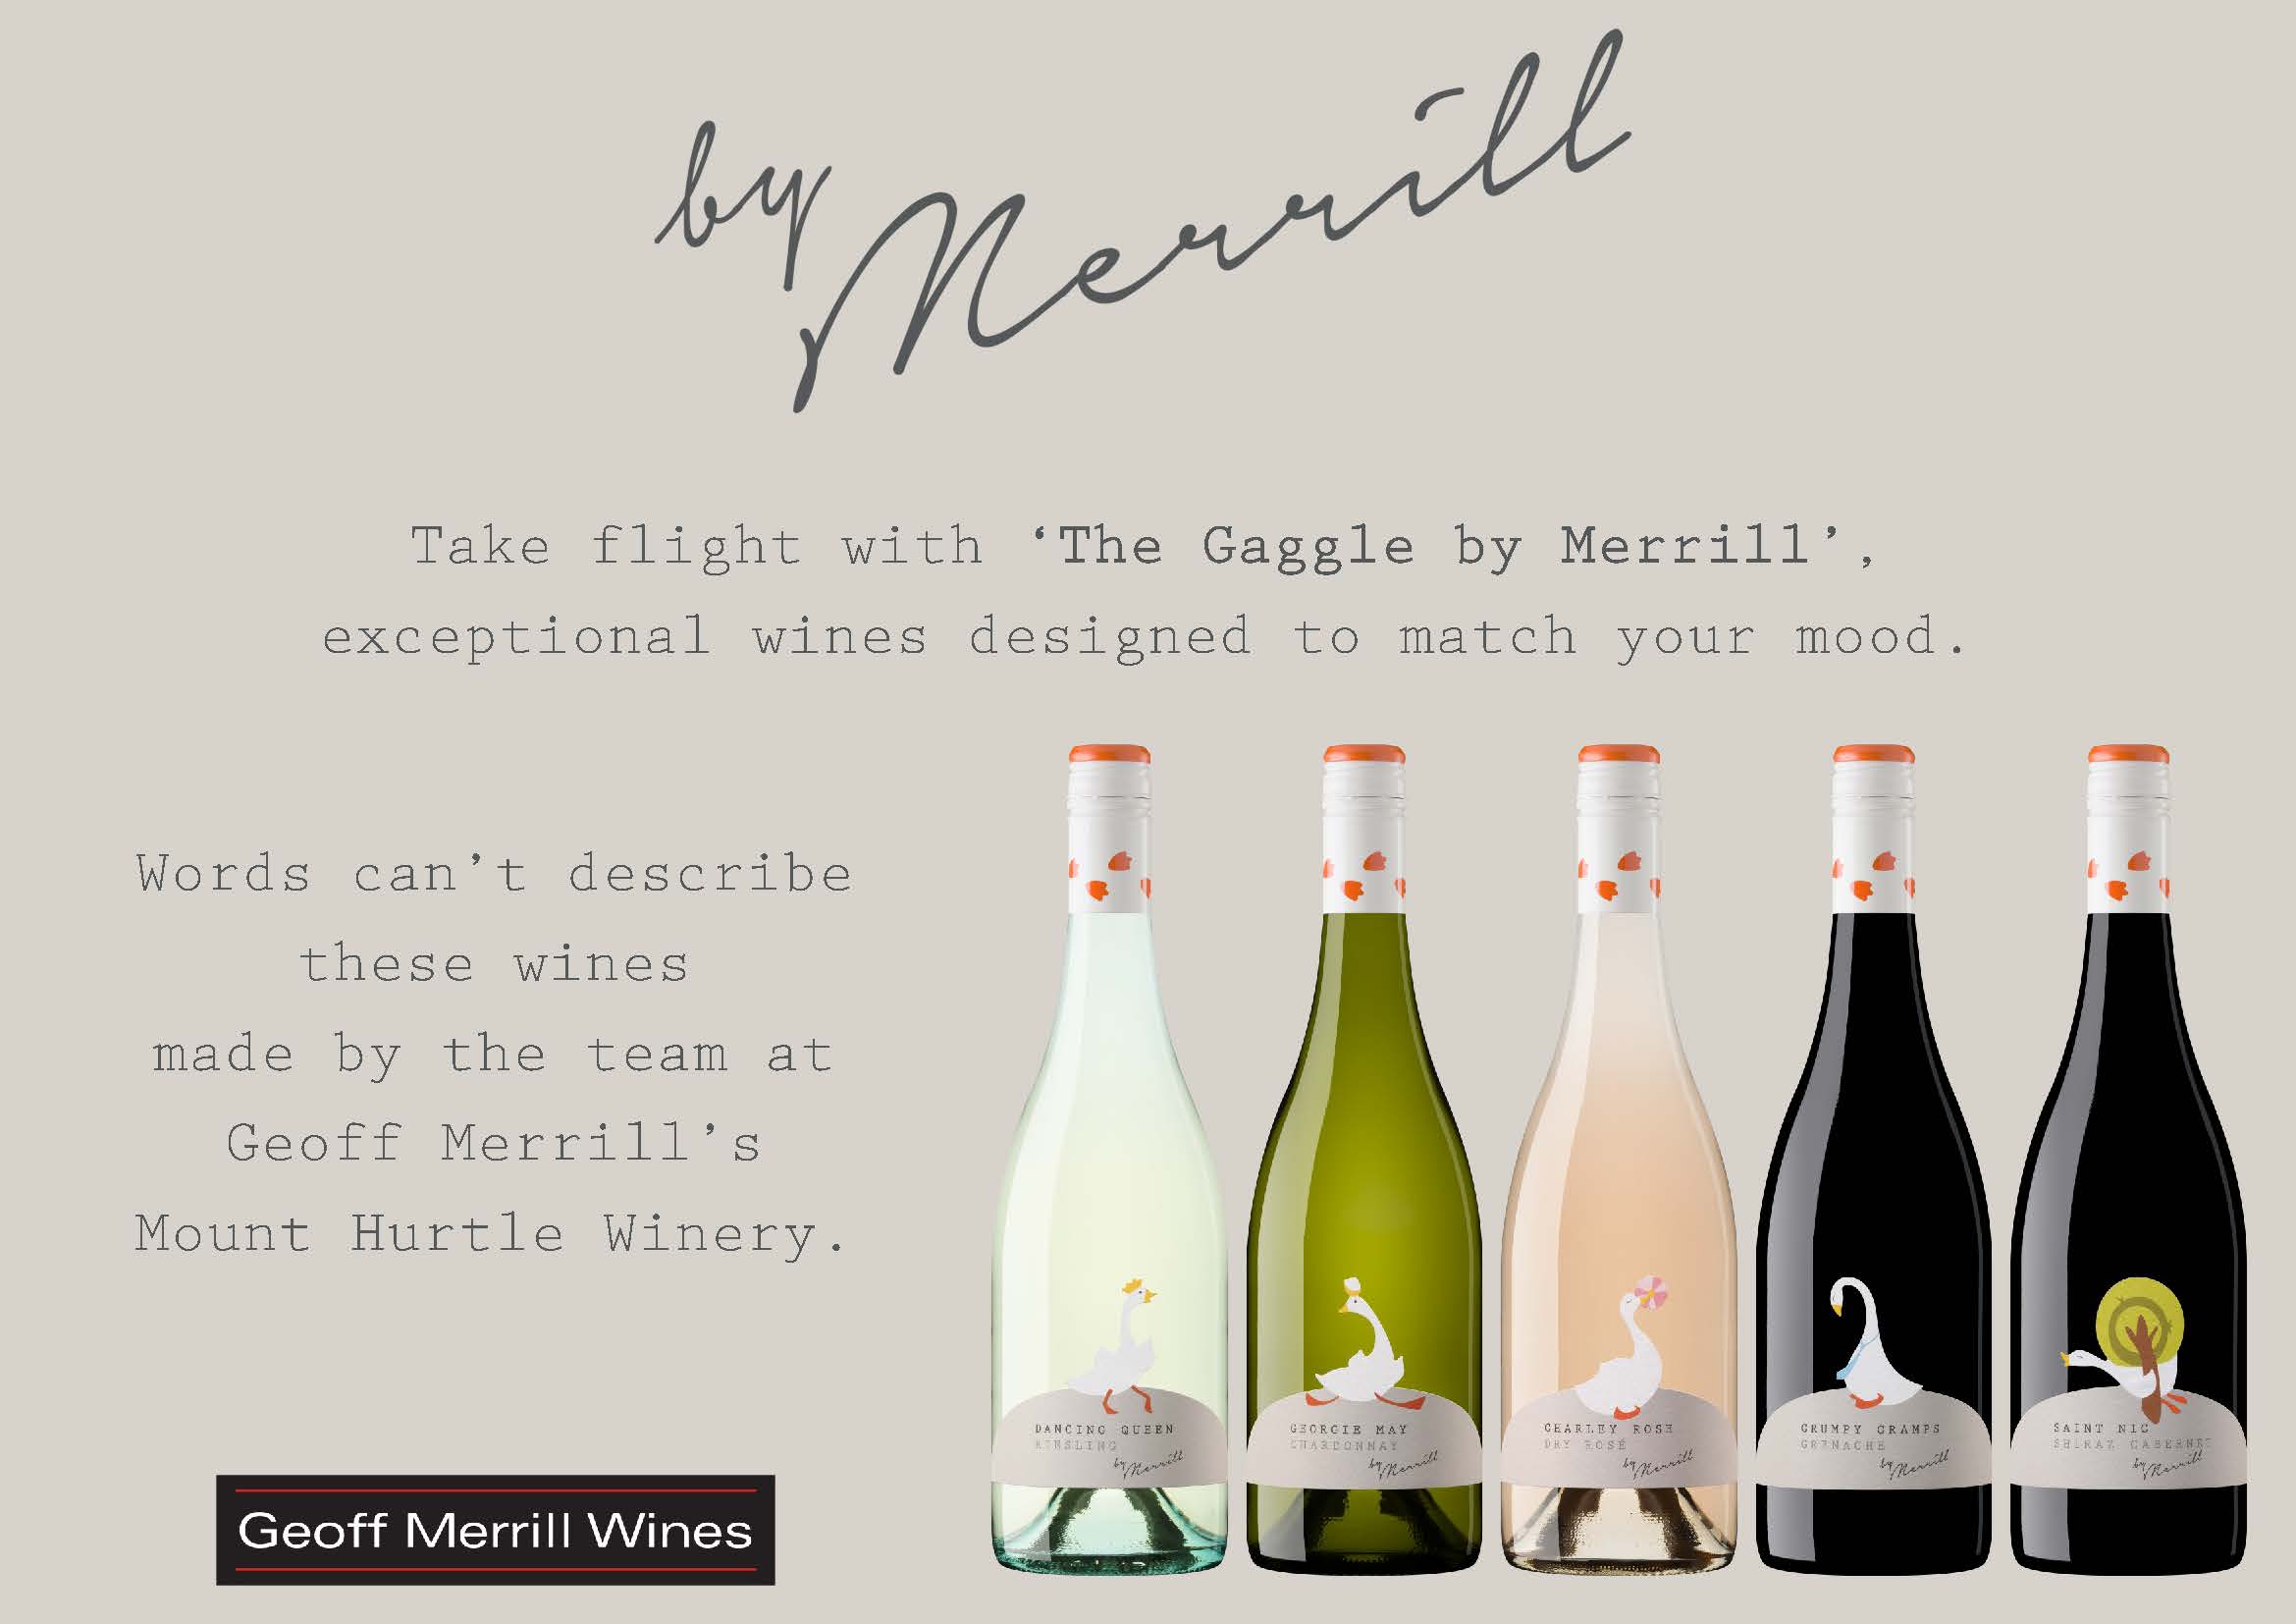 Introducing The Gaggle by Merrill